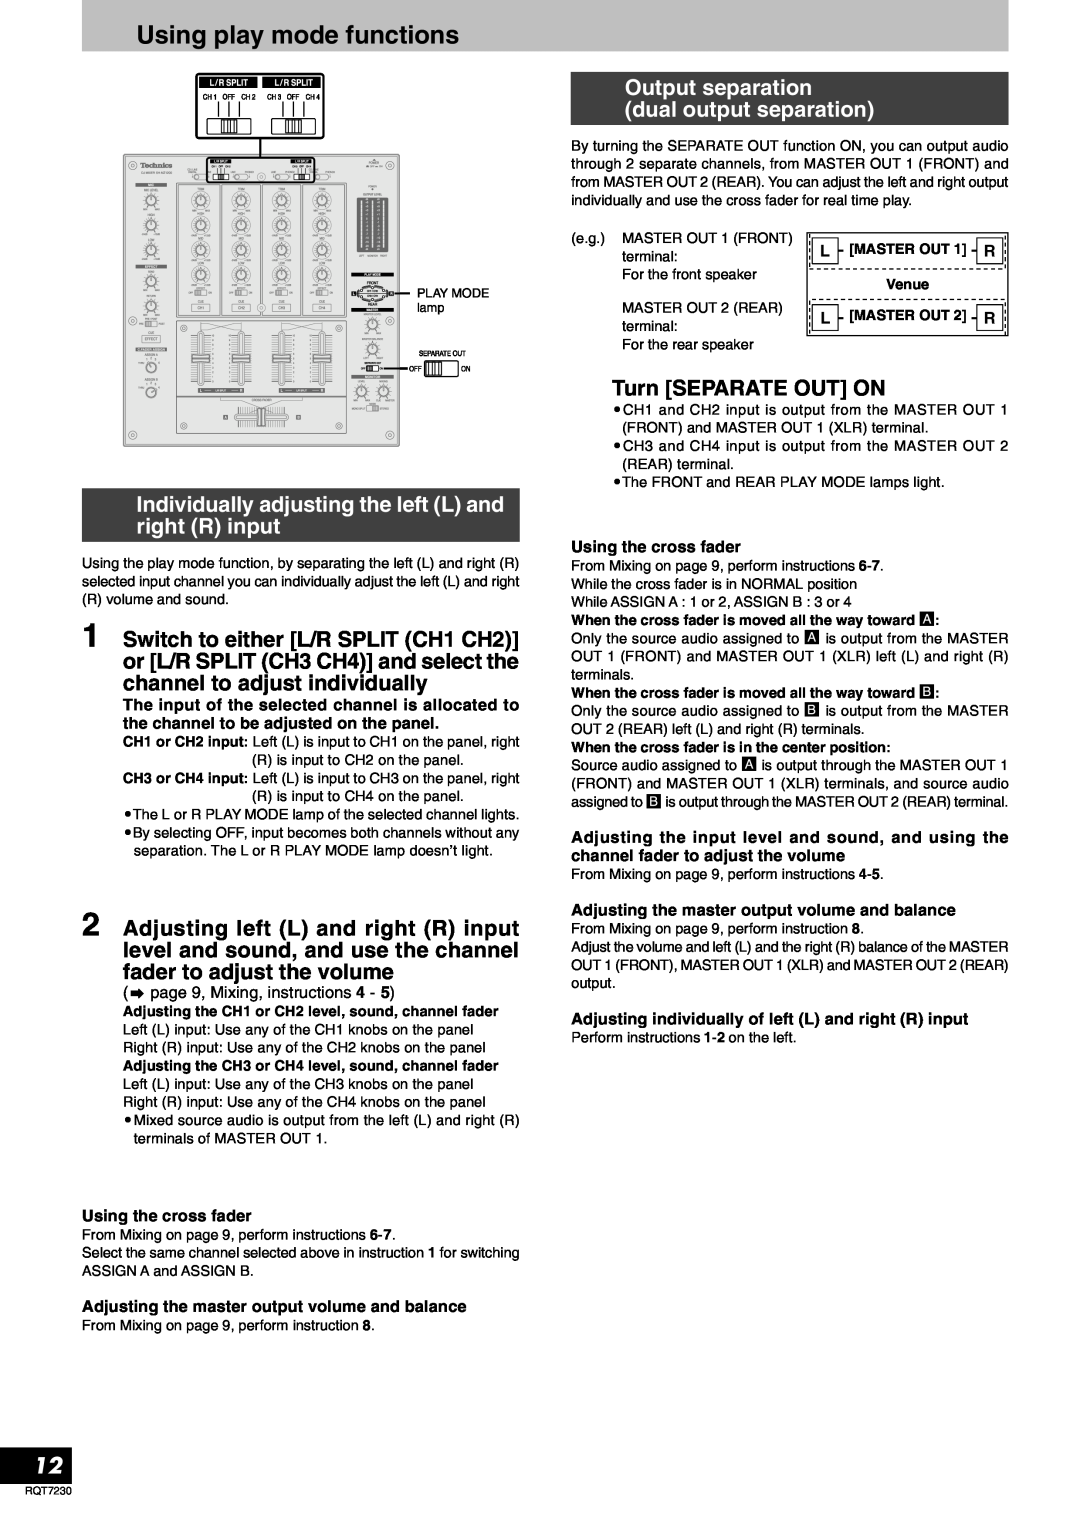 Panasonic RQT7230-3Y, SH-MZ1200 operating instructions Using play mode functions, Output separation dual output separation 